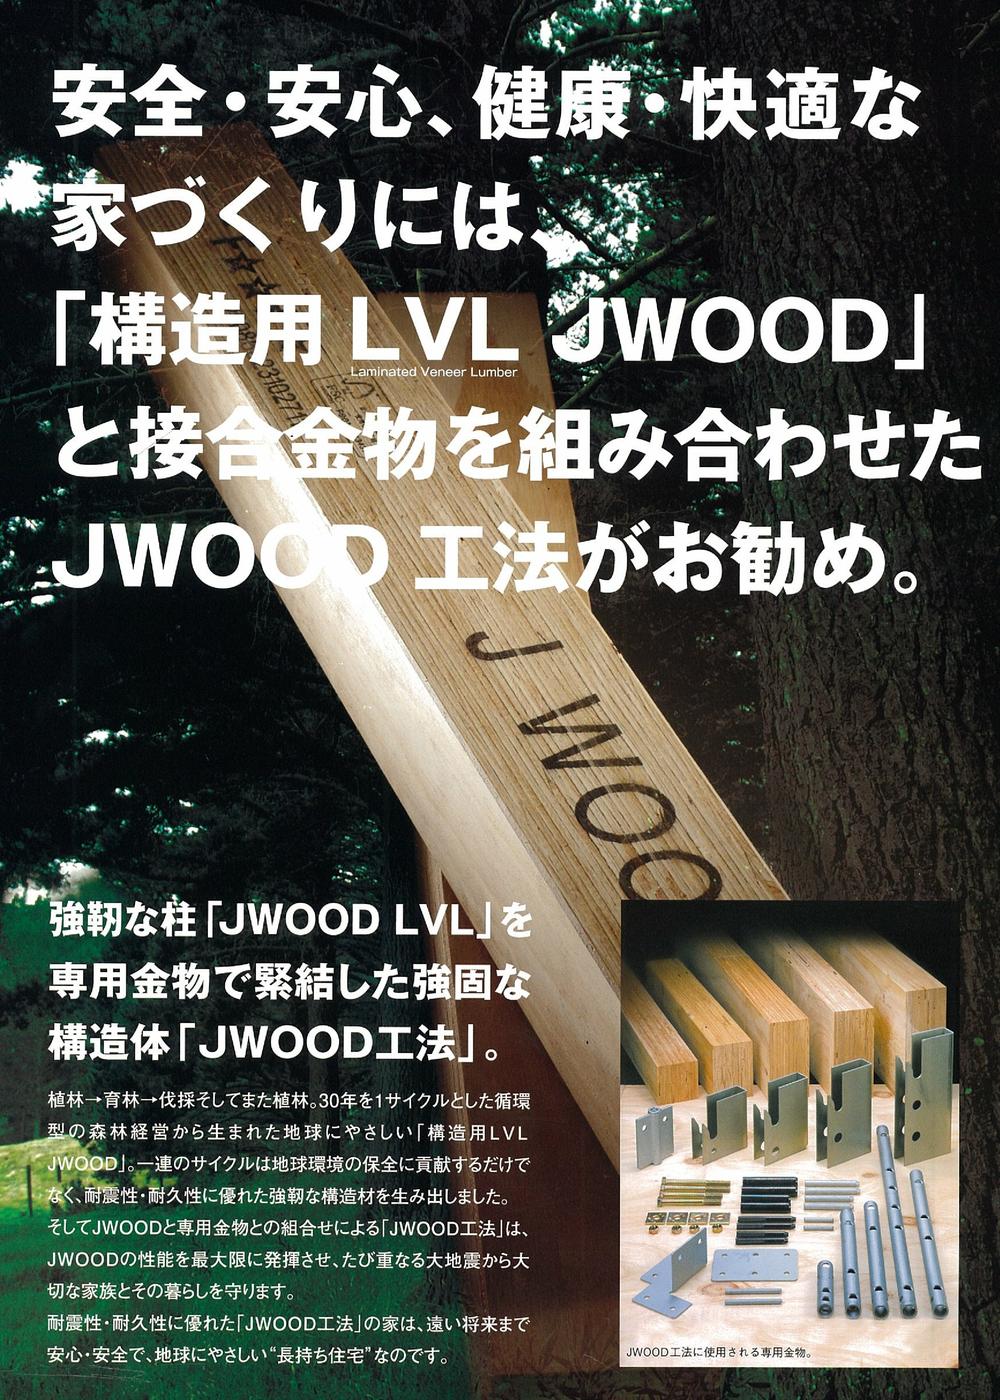 Construction ・ Construction method ・ specification. Firmly support the is important dwelling house of the structure using a dedicated hardware "JWOOD method".